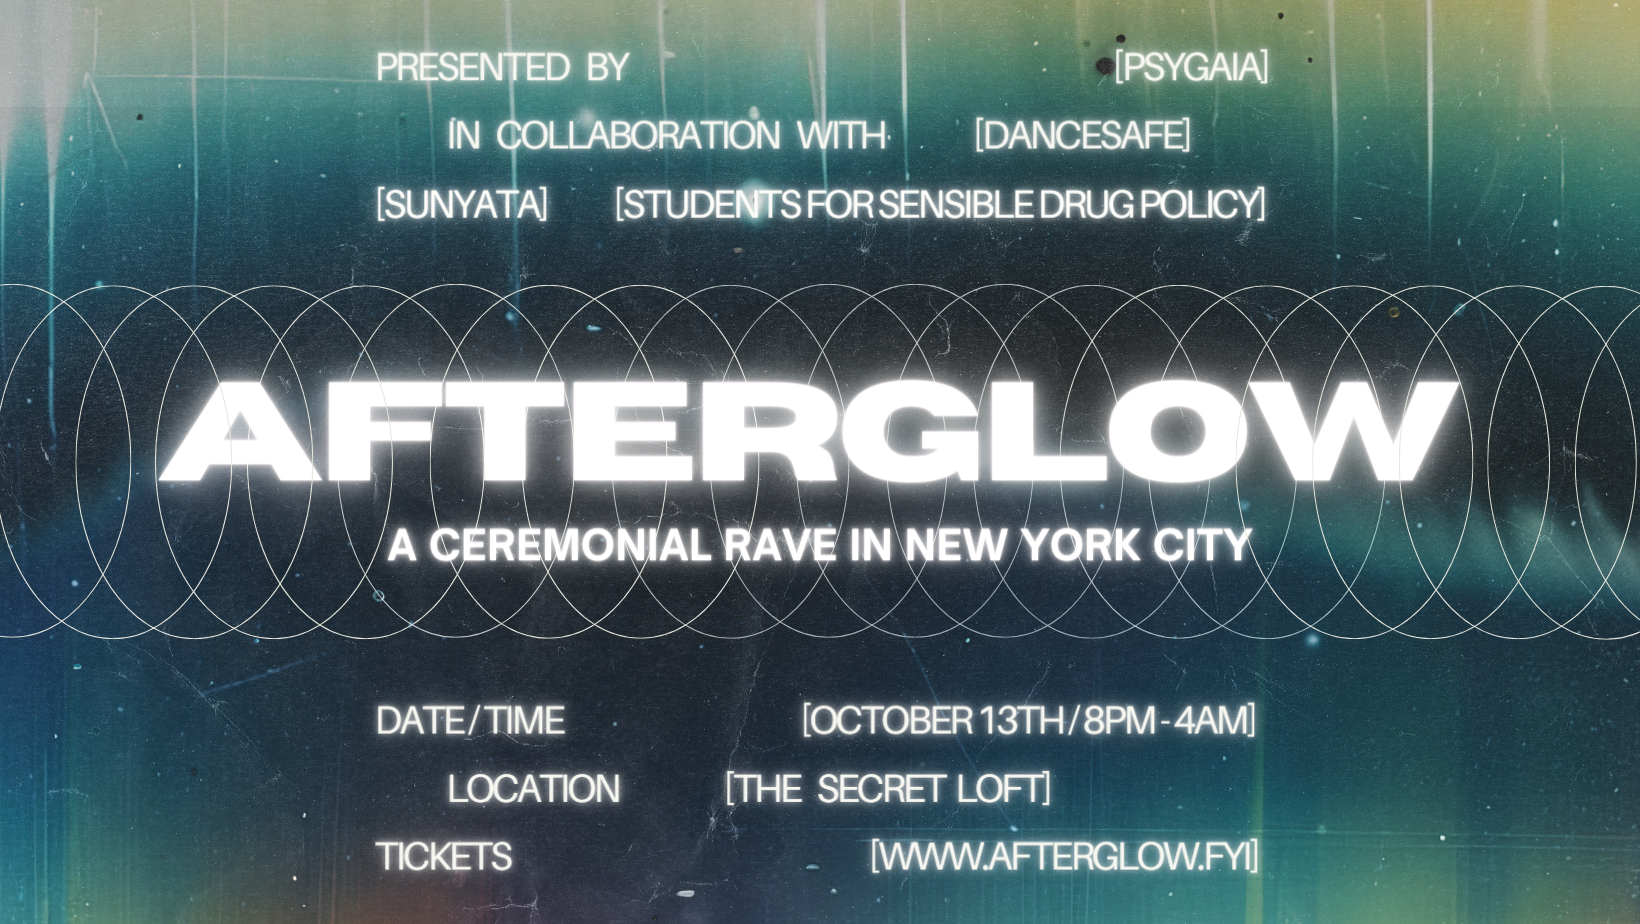 A poster for afterglow a ceremonial rave in new york city